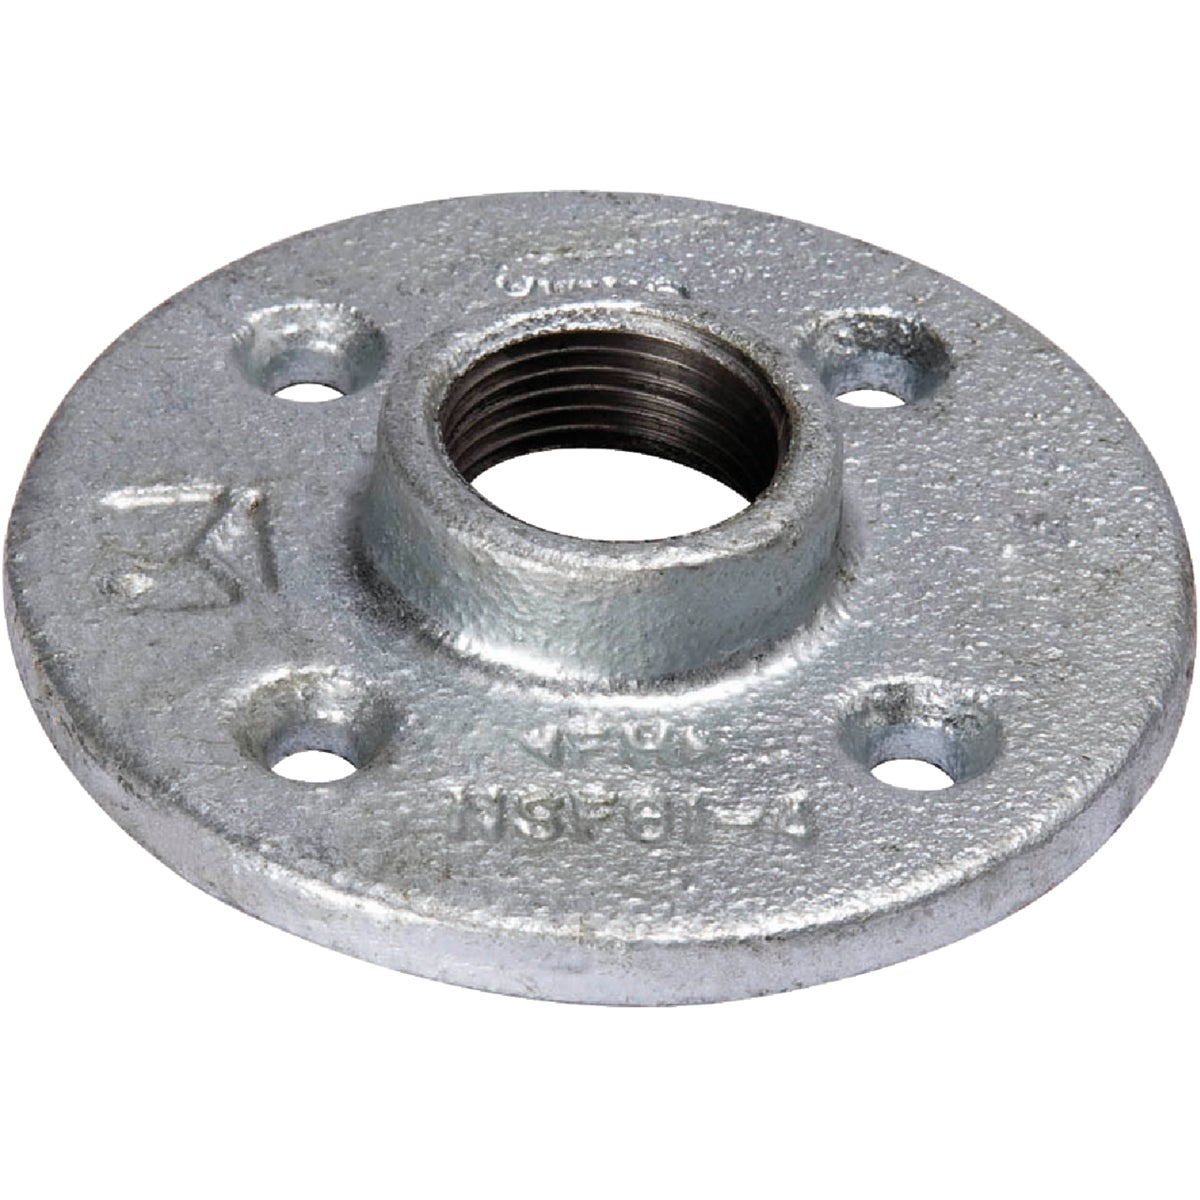 Southland 1-1/4 In. Malleable Iron Galvanized Floor Flange